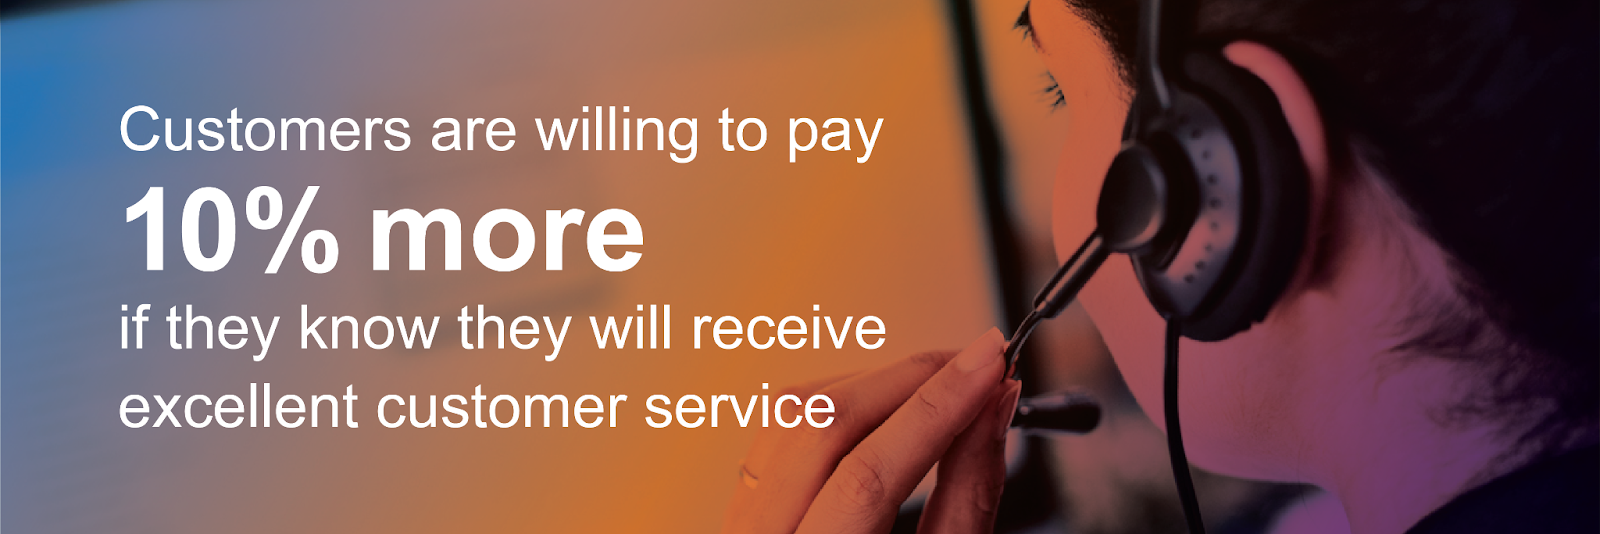 Customer are willing to pay 10% more if they know they will receive excellent customer service.